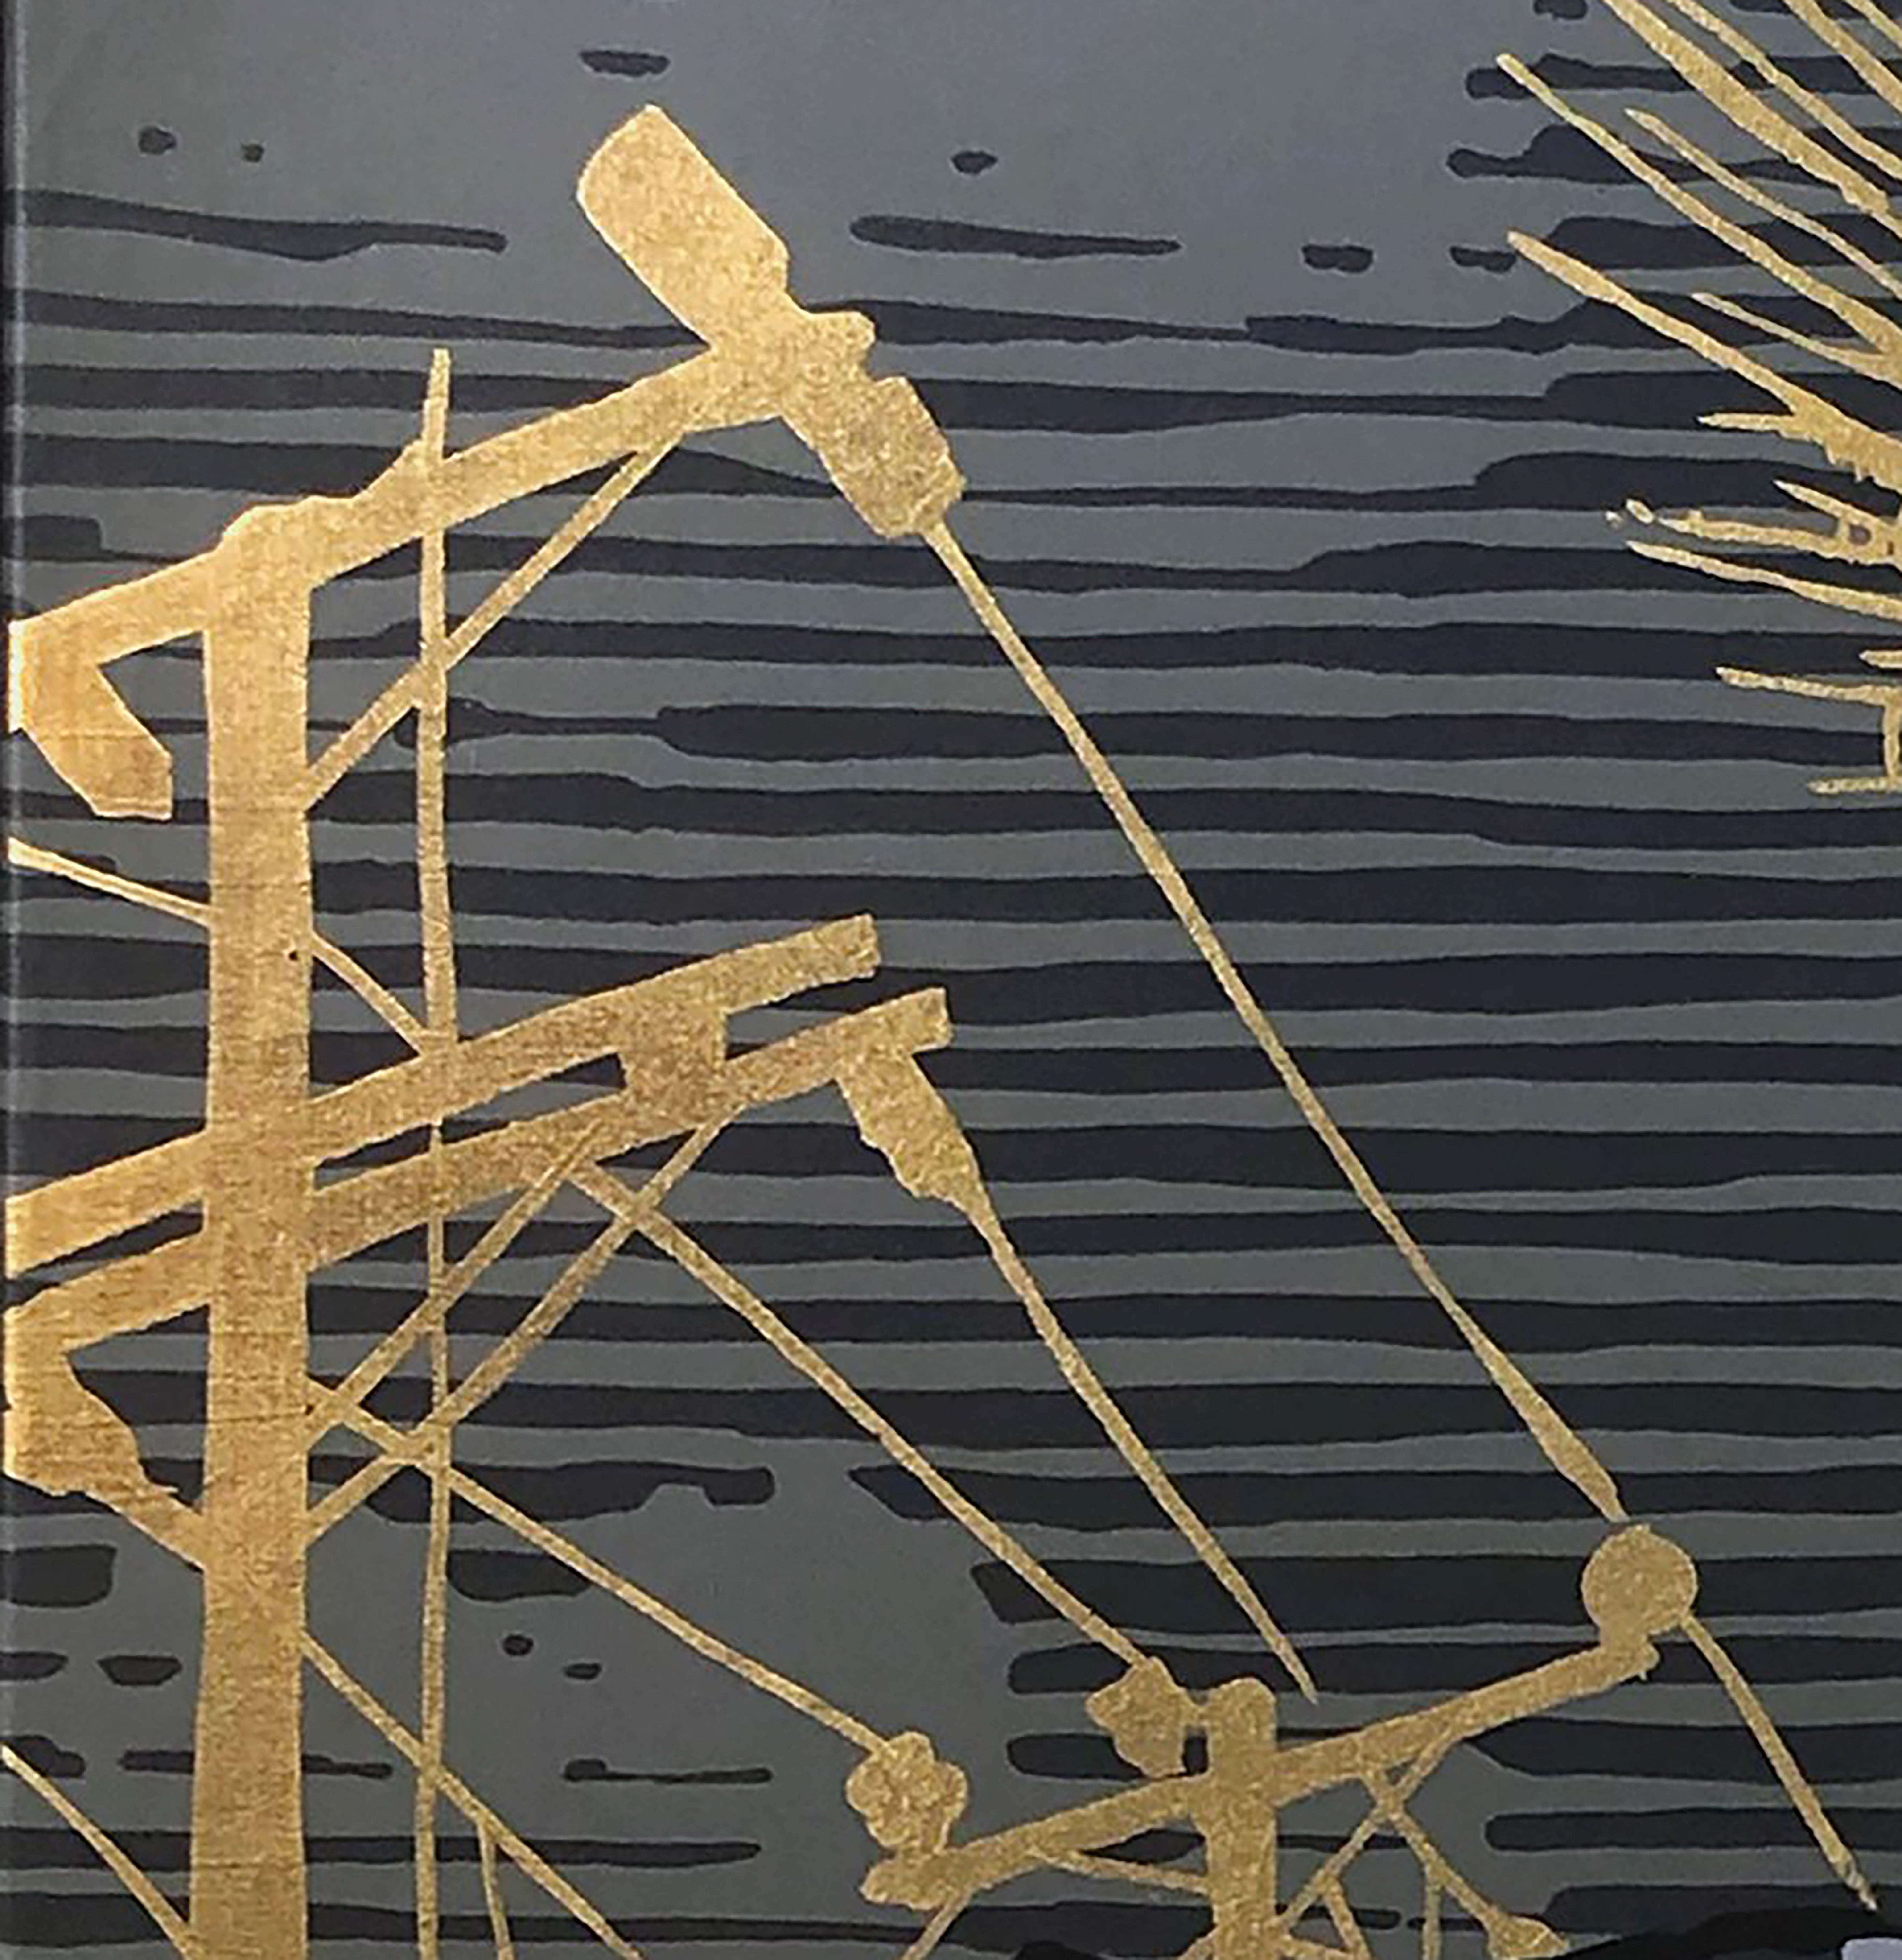 Templanza, 2019, Acrylic on Canvas with Gold Foil  - Painting by Rafael Barón